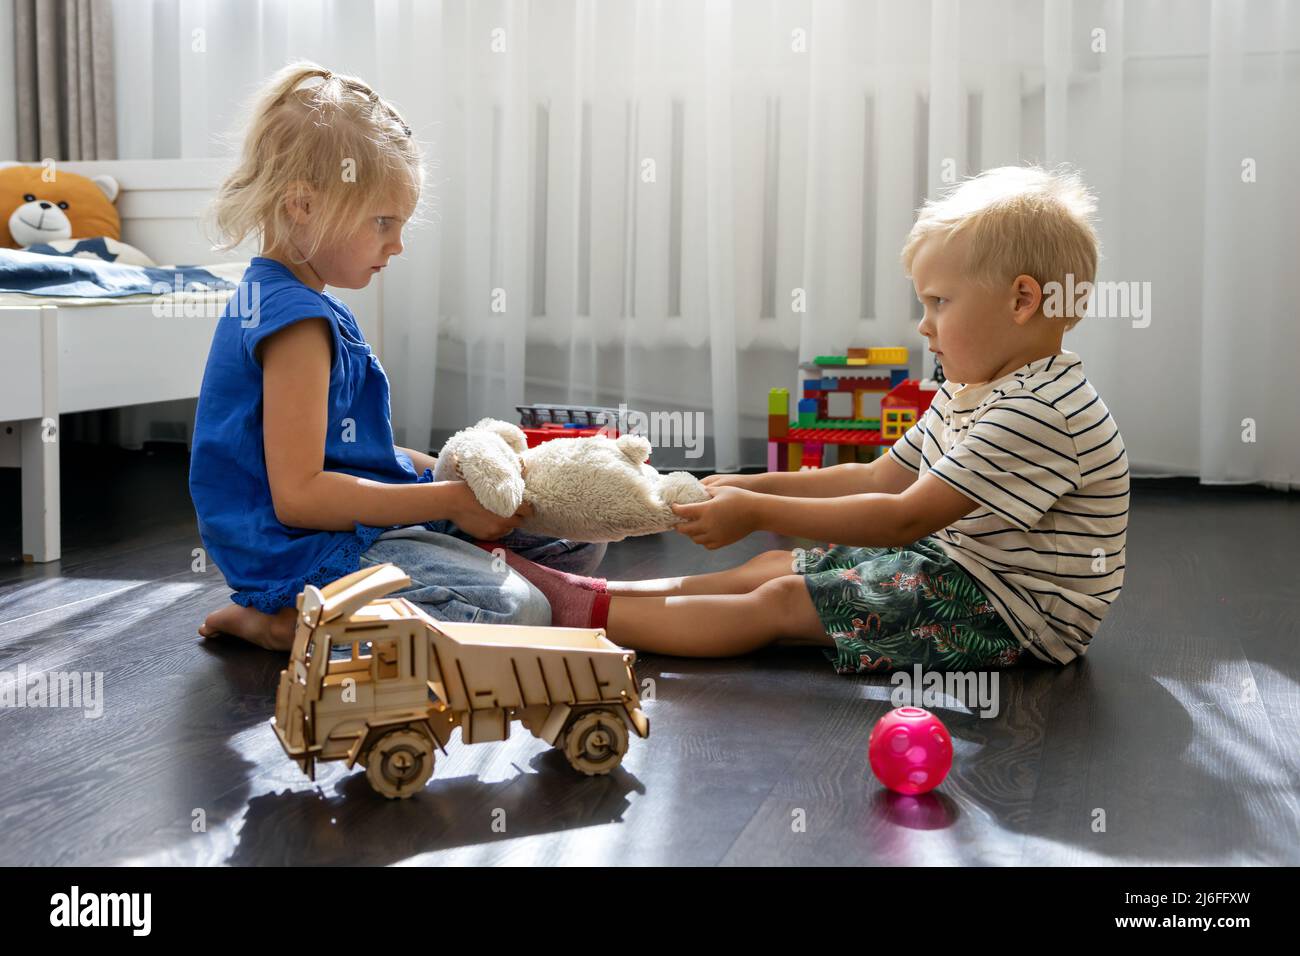 kids are fighting over a toy. conflict between sister and brother. sibling relationships Stock Photo